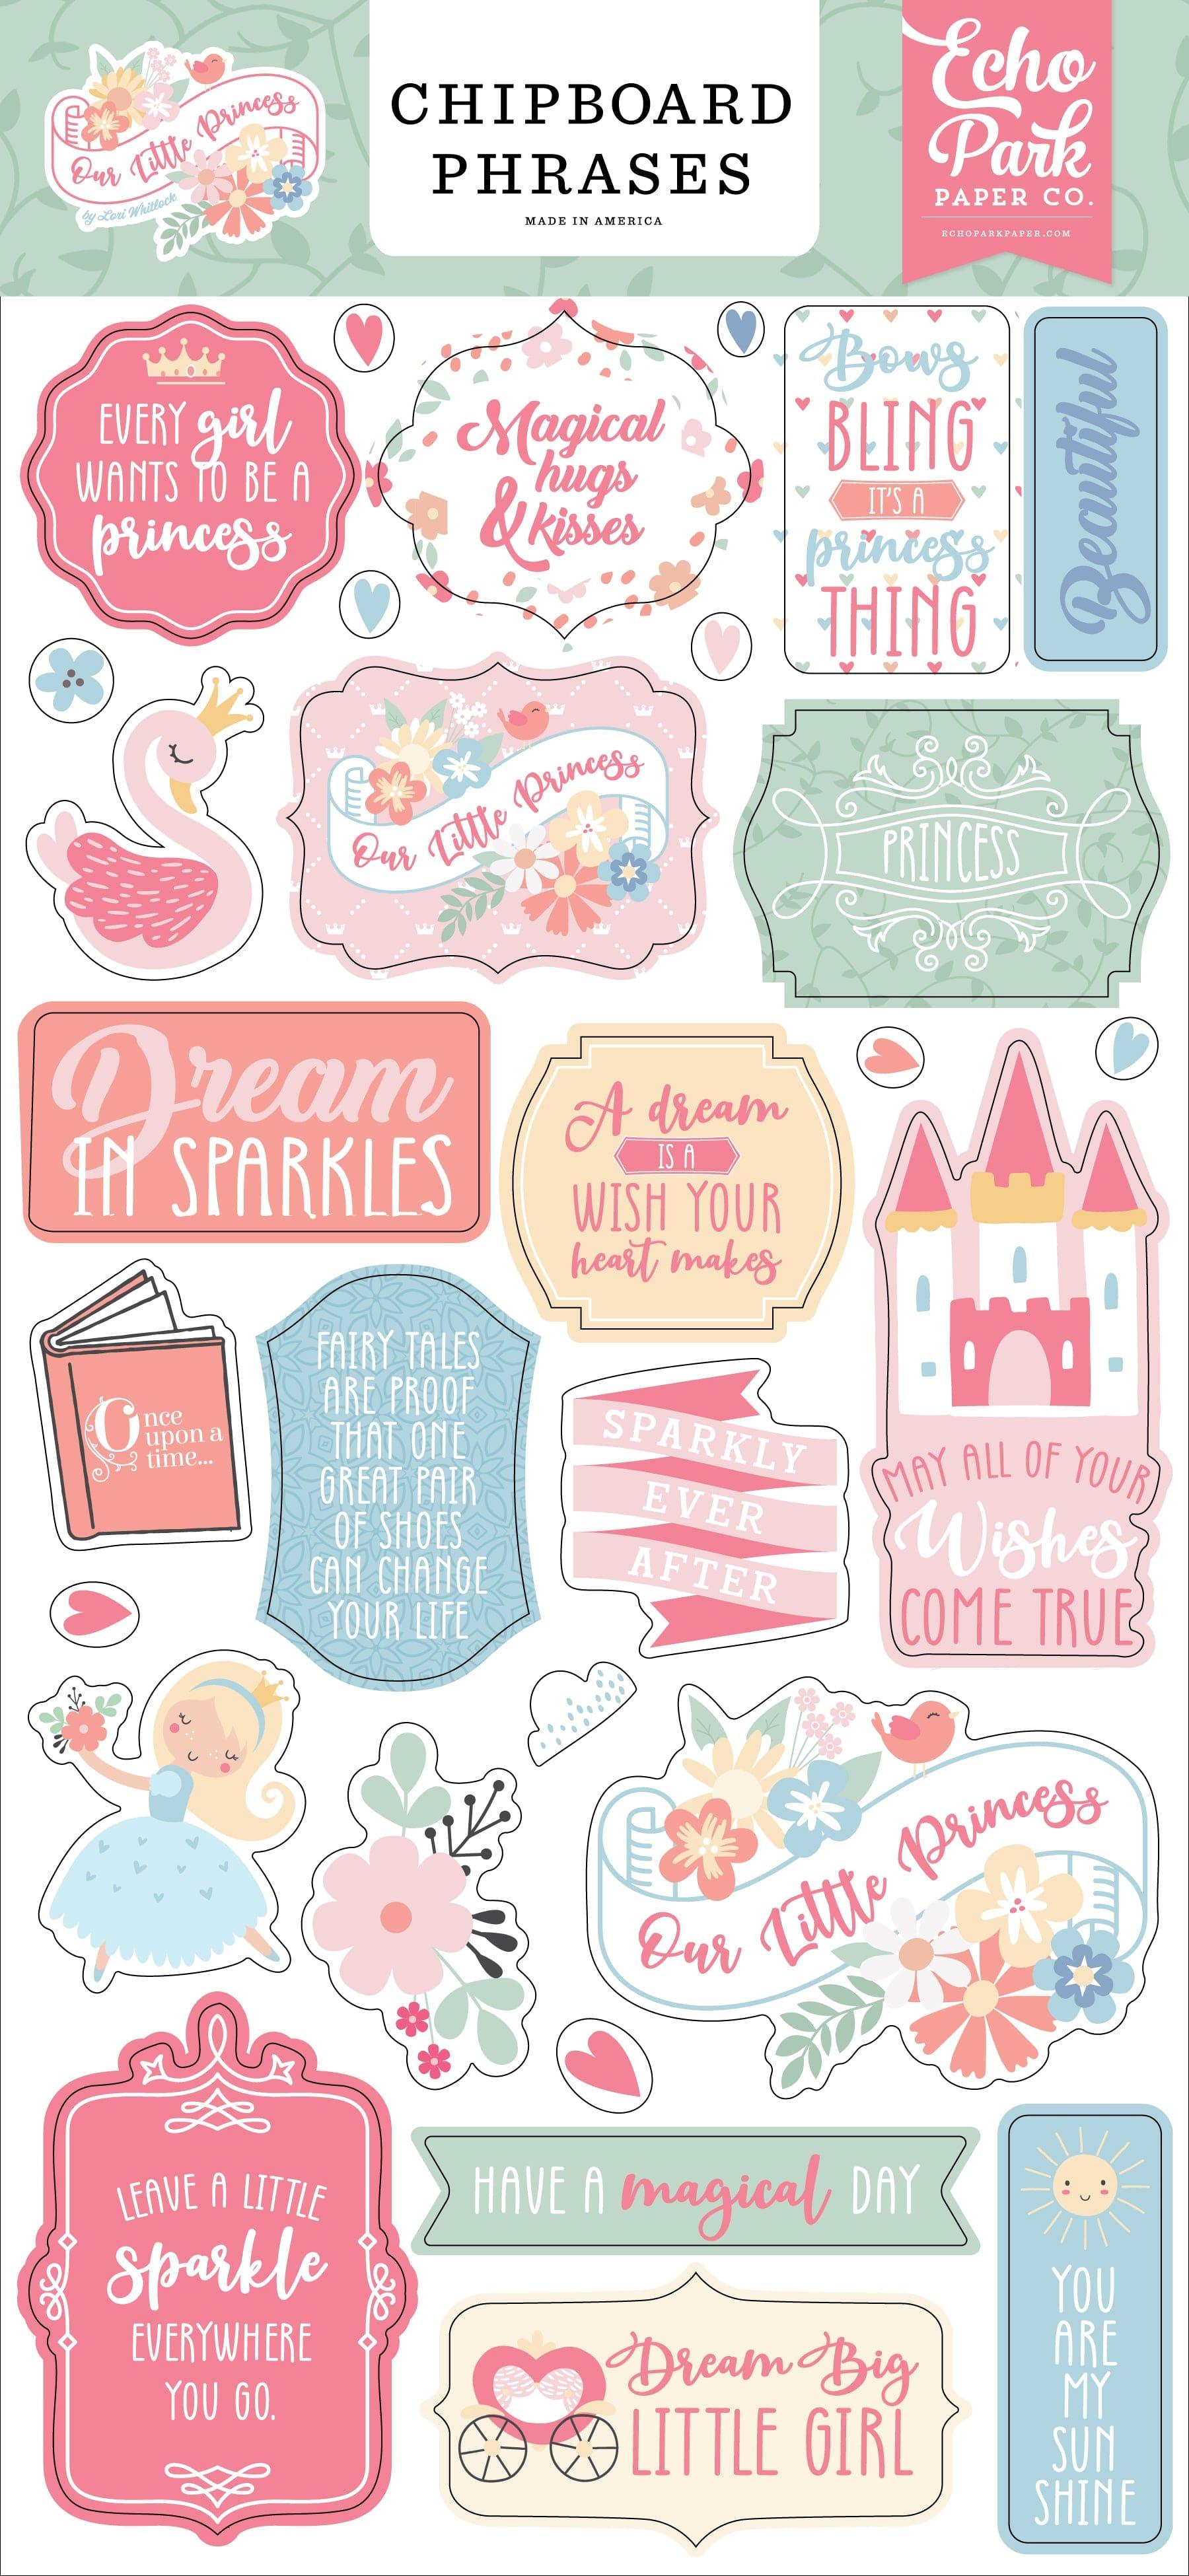 Our Little Princess Collection 6 x 12 Scrapbook Chipboard Phrases by Echo Park Paper - Scrapbook Supply Companies